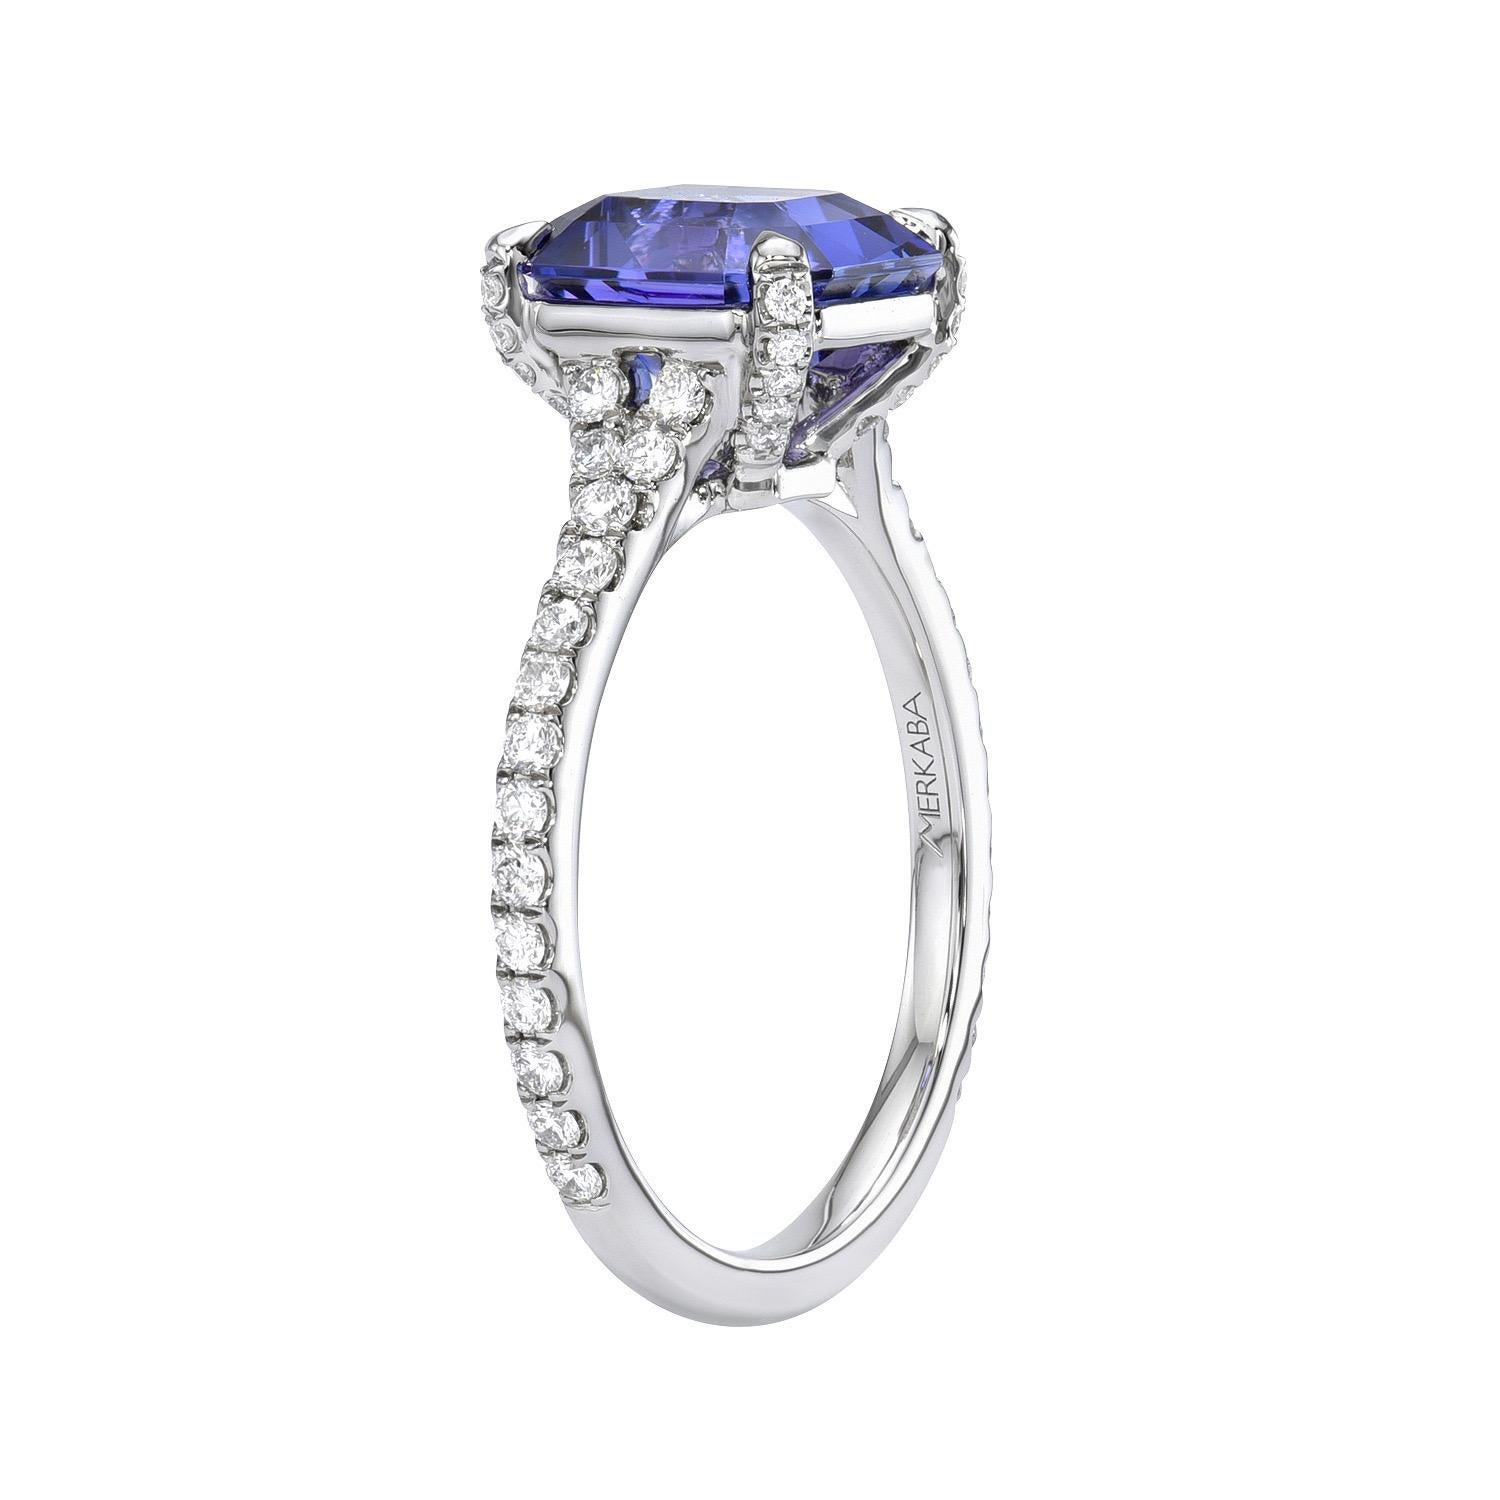 Elegant 2.64 carat Tanzanite square Emerald Cut platinum ring, decorated with a total of 0.41 carat round brilliant diamonds.
Ring size 6.5. Resizing is complementary upon request.
Returns are accepted and paid by us within 7 days of